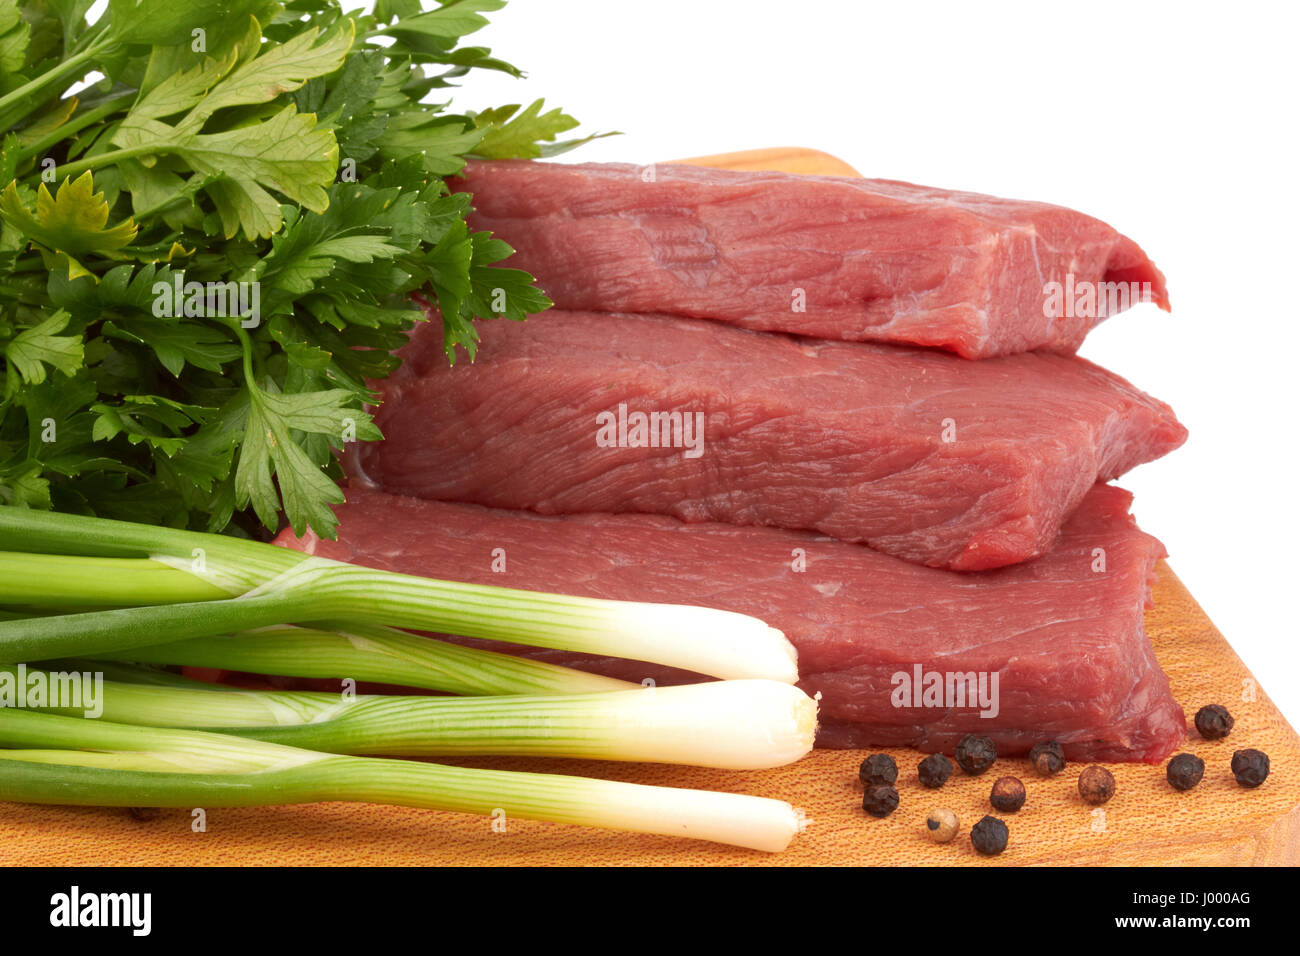 fresh raw beef meat slices over a wooden board Stock Photo